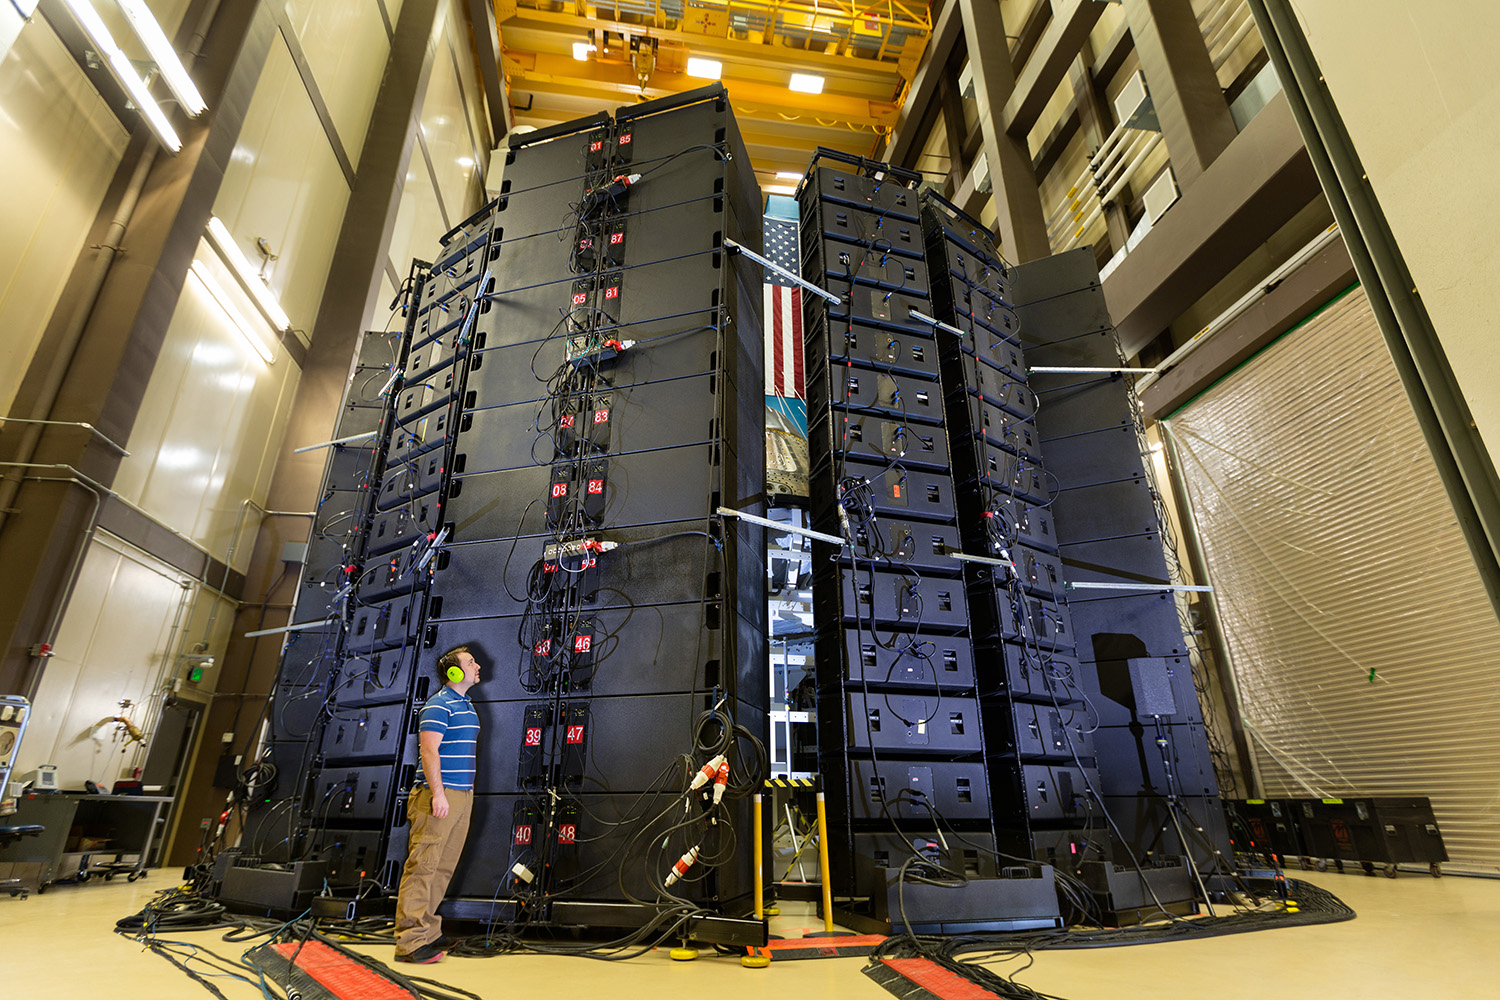 Lockheed Built A Ridiculously Huge Sound System That Will Never Play Music